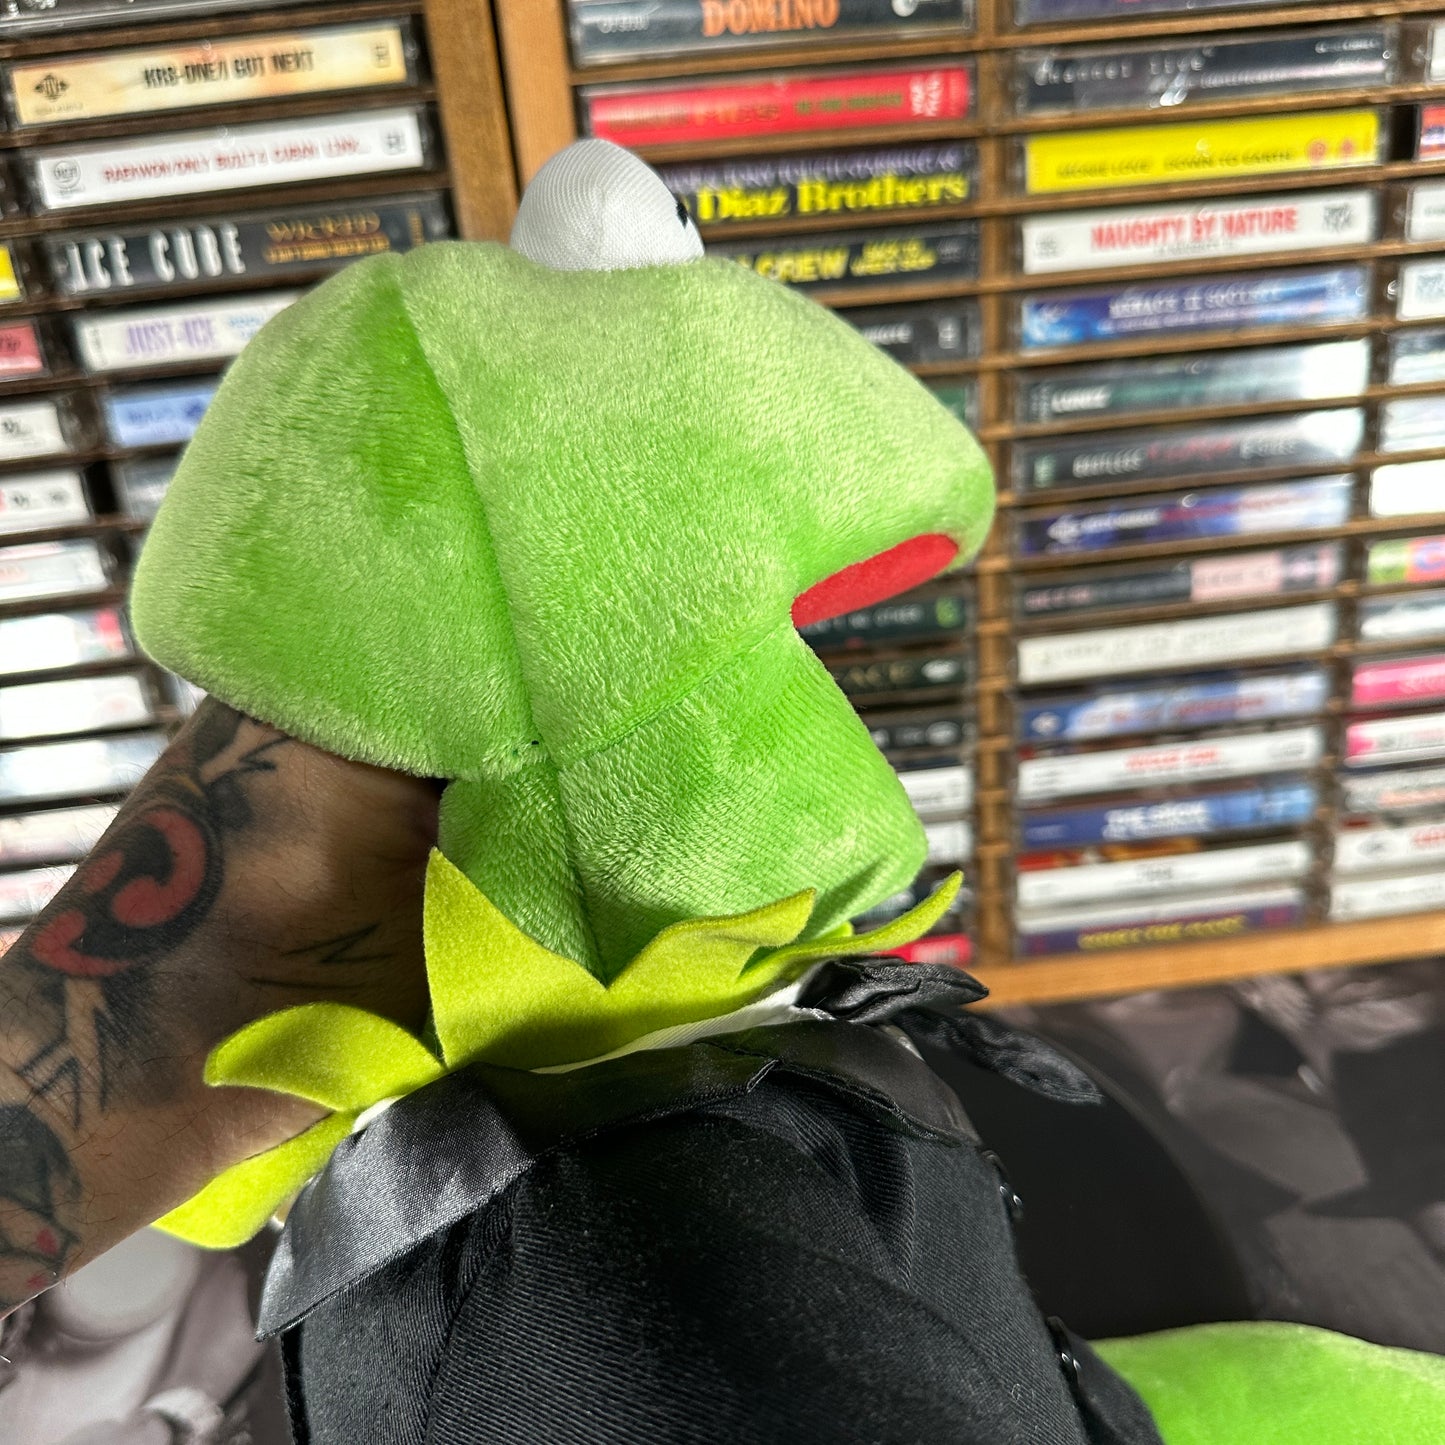 2011 Build A Bear BAB Kermit The Frog Plush Hand Puppet The Muppets 21” EUC